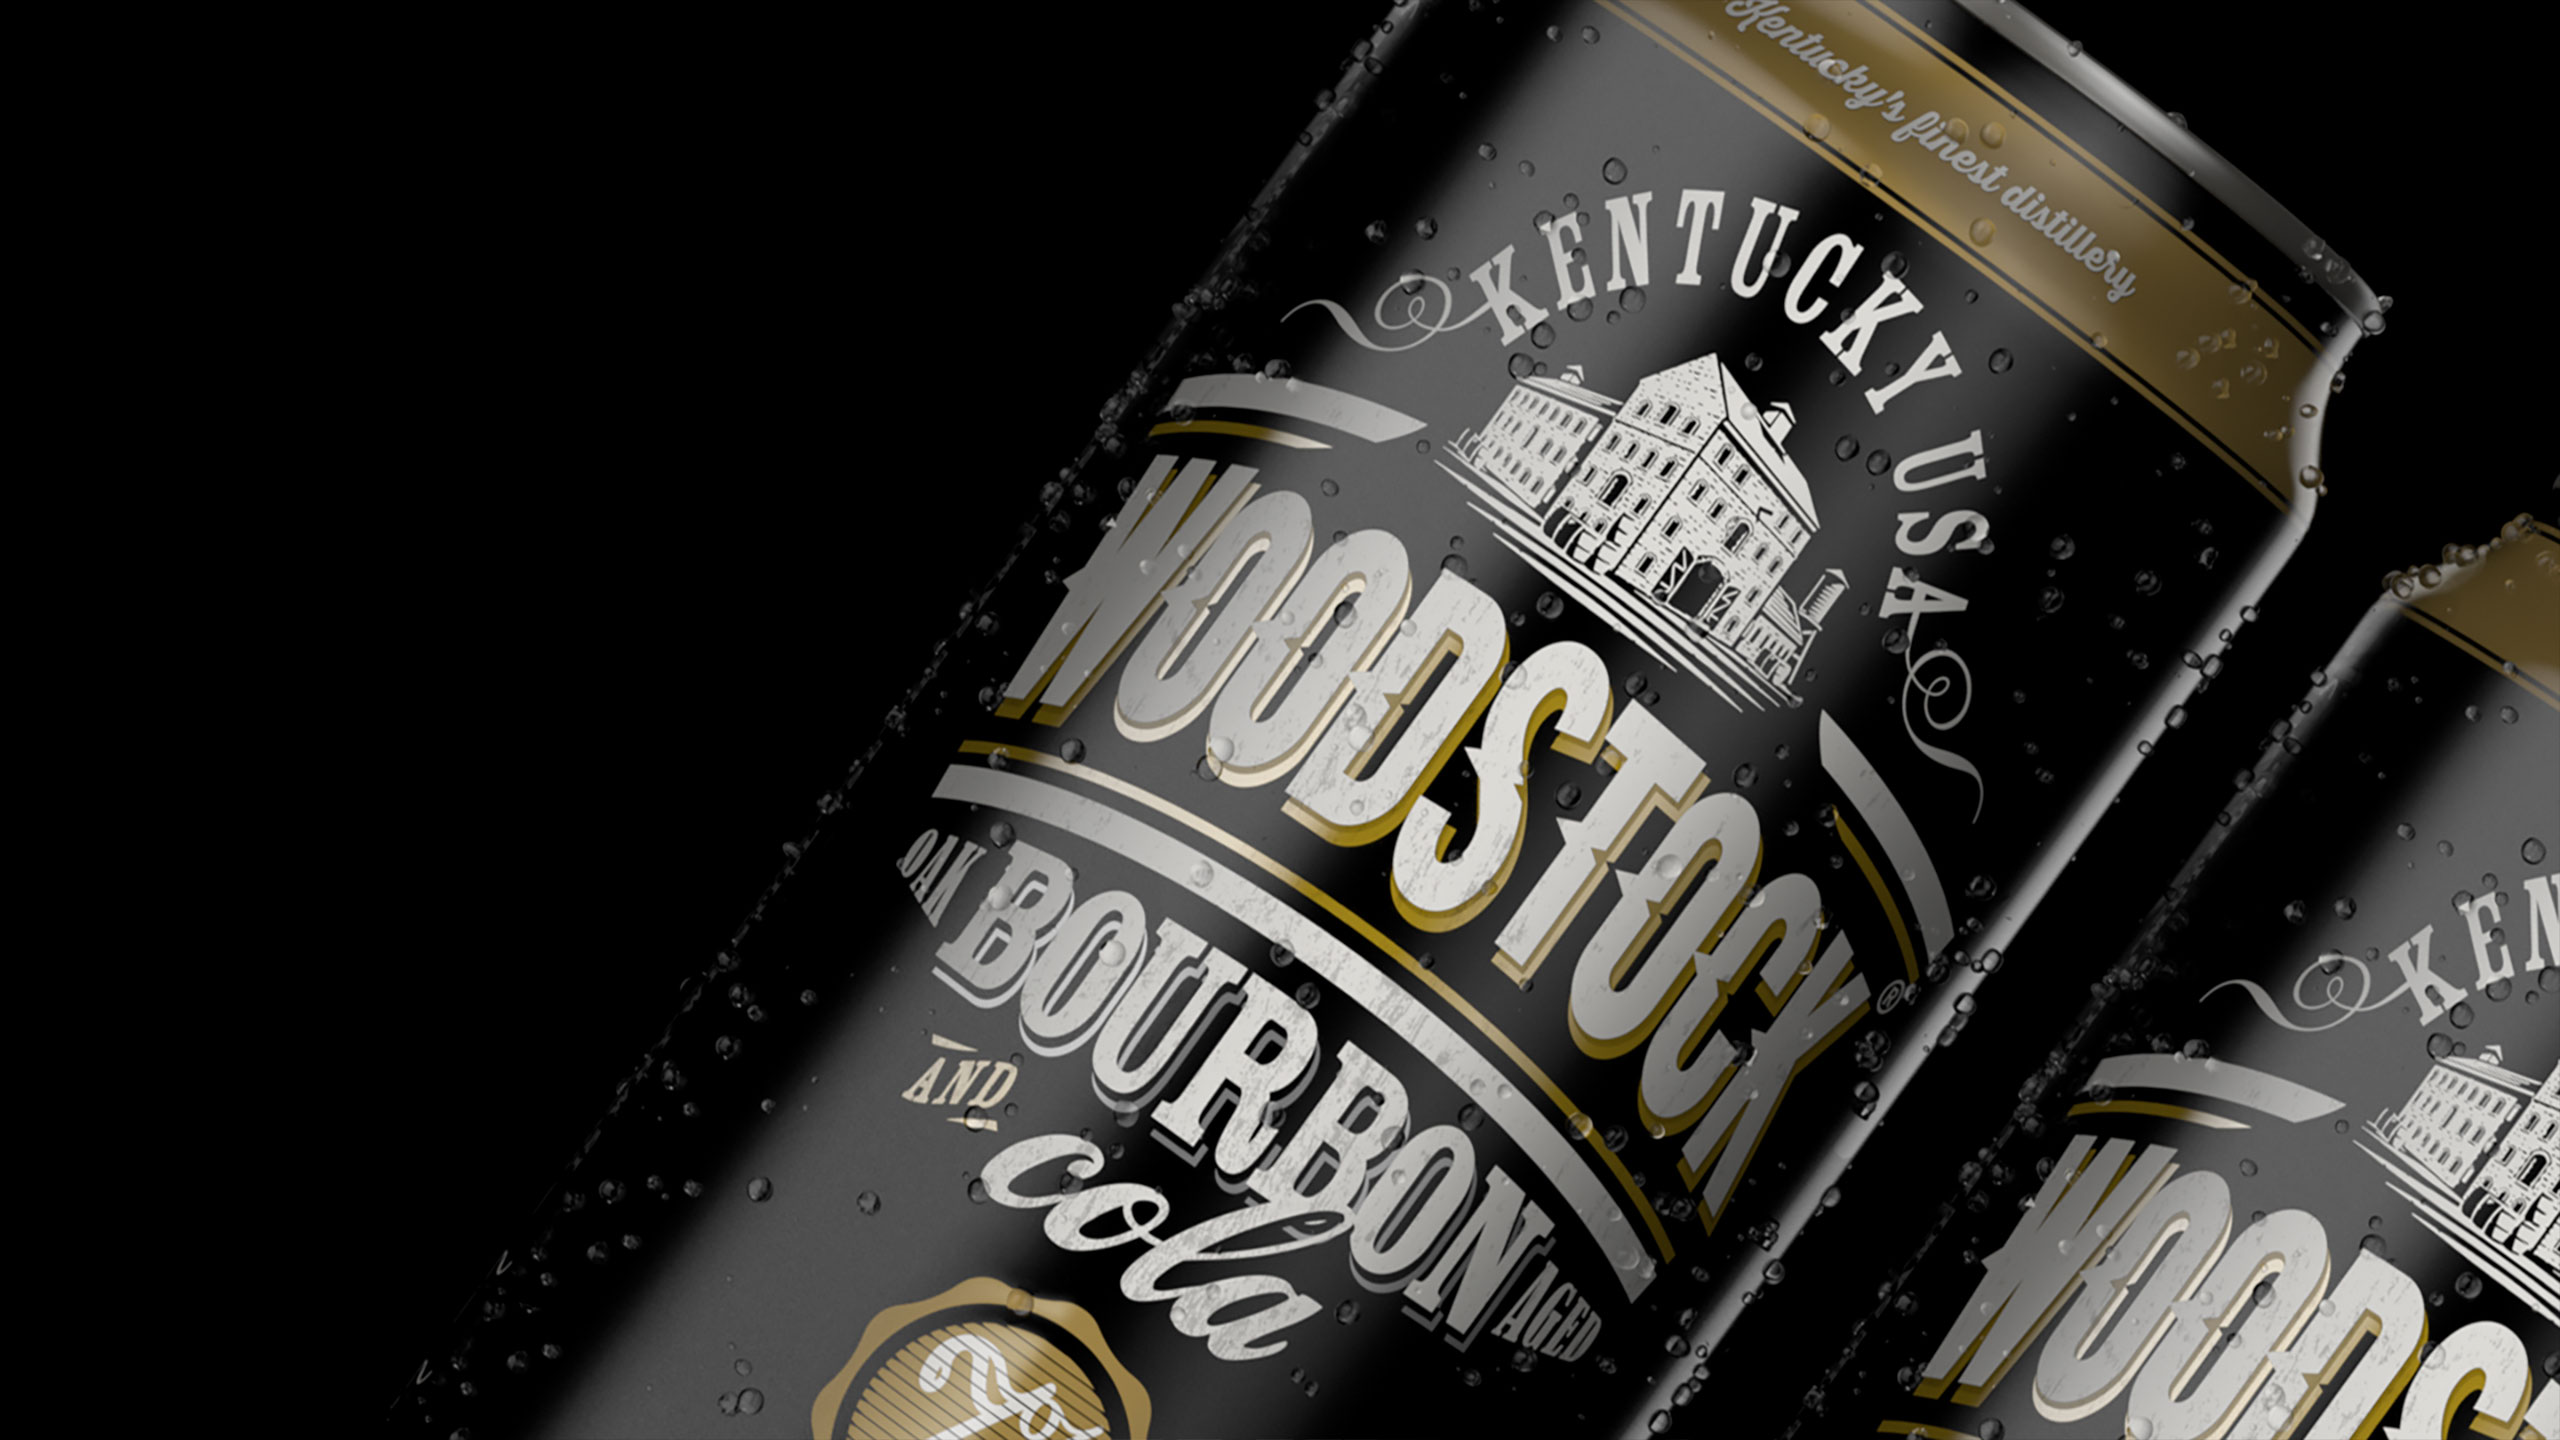 Tried-and-True-Design-Auckland-Woodstock-Bourbon-Can-angled-view